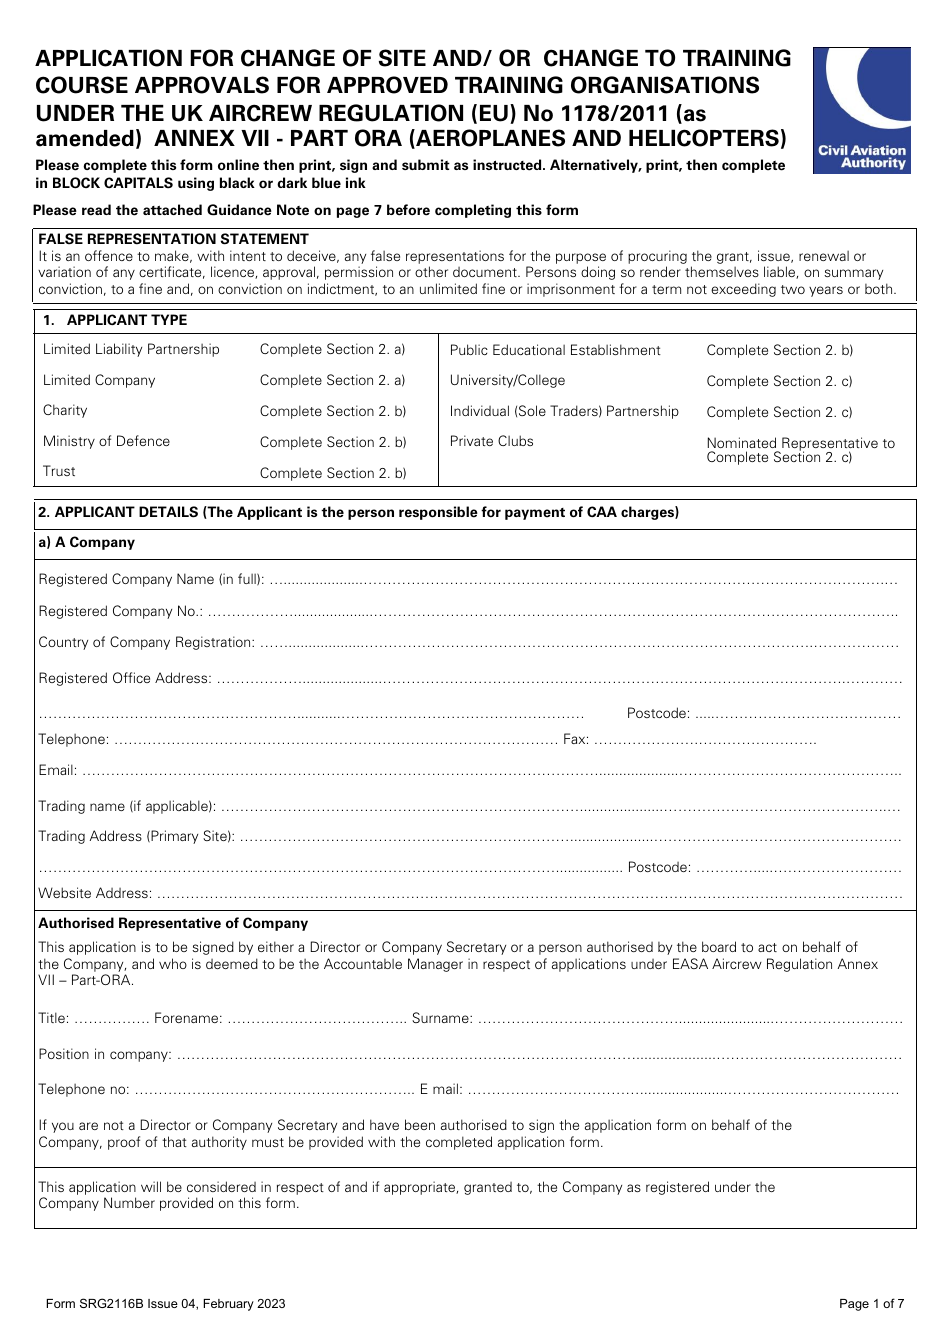 Form SRG2116B Application for Change of Site and / or Change to Training Course Approvals for Approved Training Organisations Under the UK Aircrew Regulation (Eu) No 1178 / 2011 (As Amended) Annex VII - Part Ora (Aeroplanes and Helicopters) - United Kingdom, Page 1